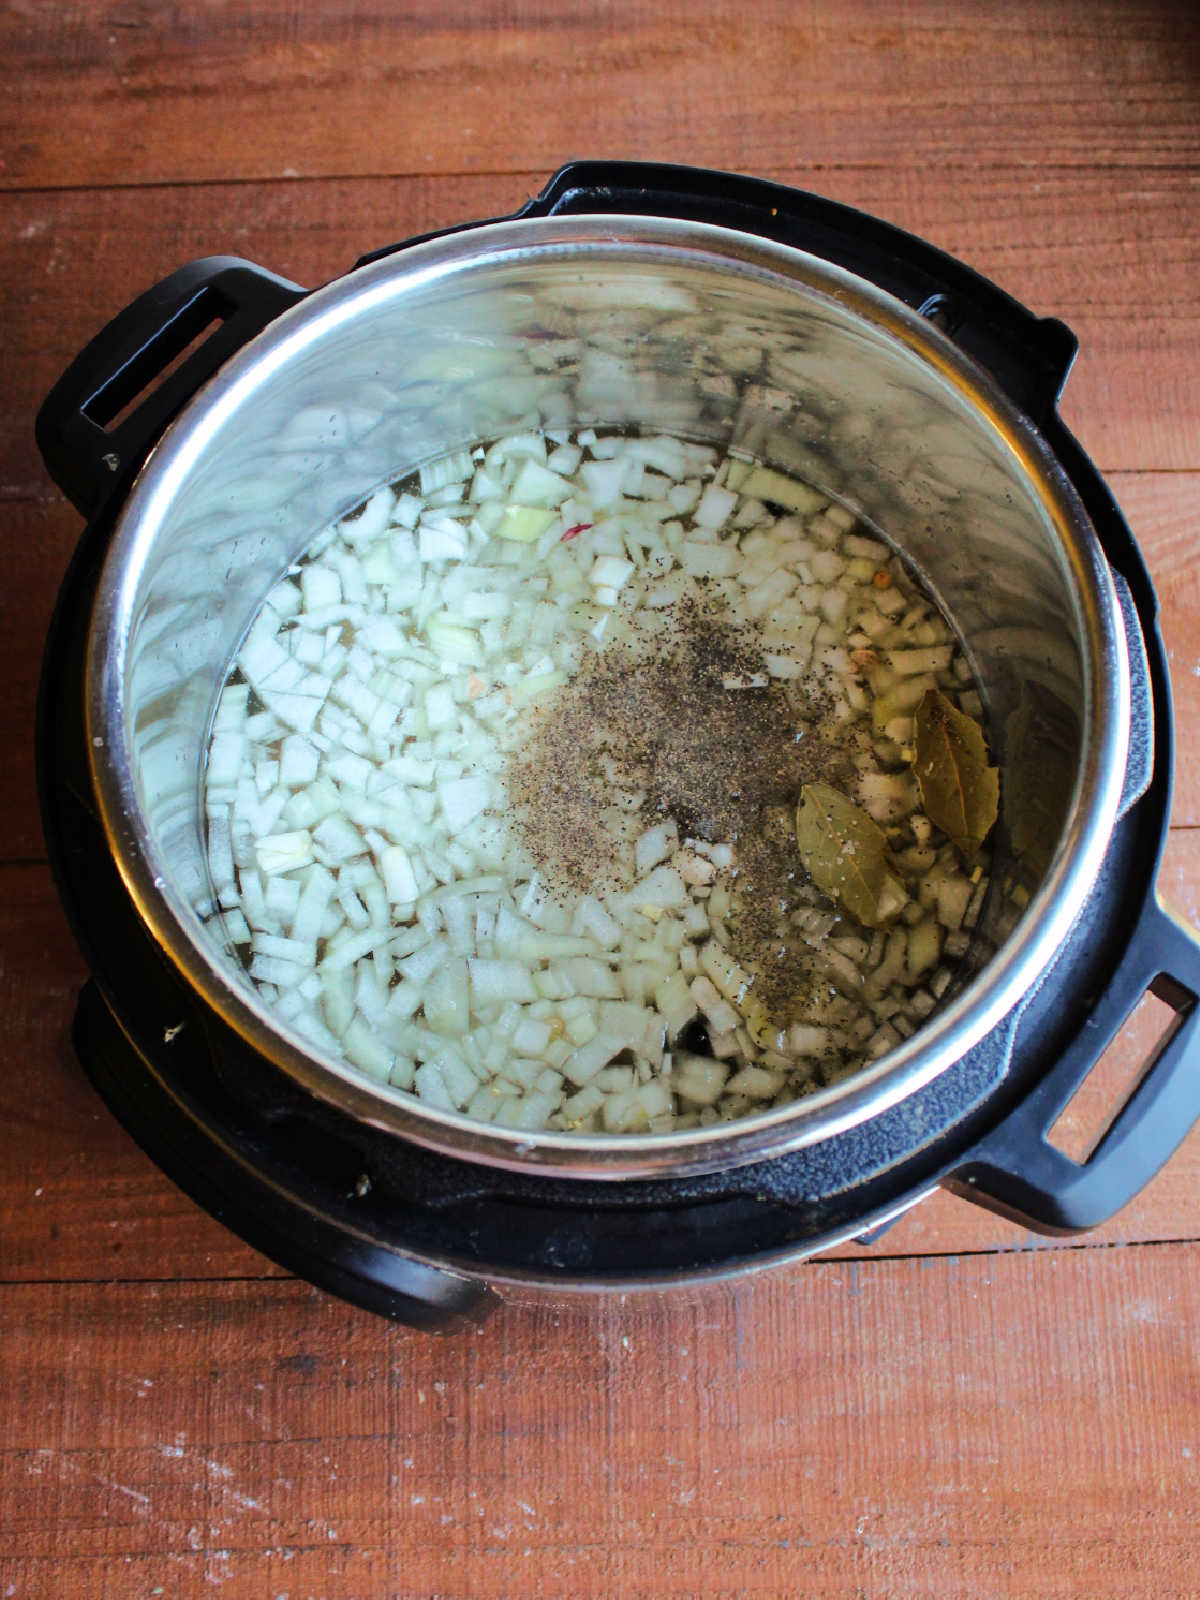 Beans, onion, water, and seasonings in Instant Pot, ready to cook.